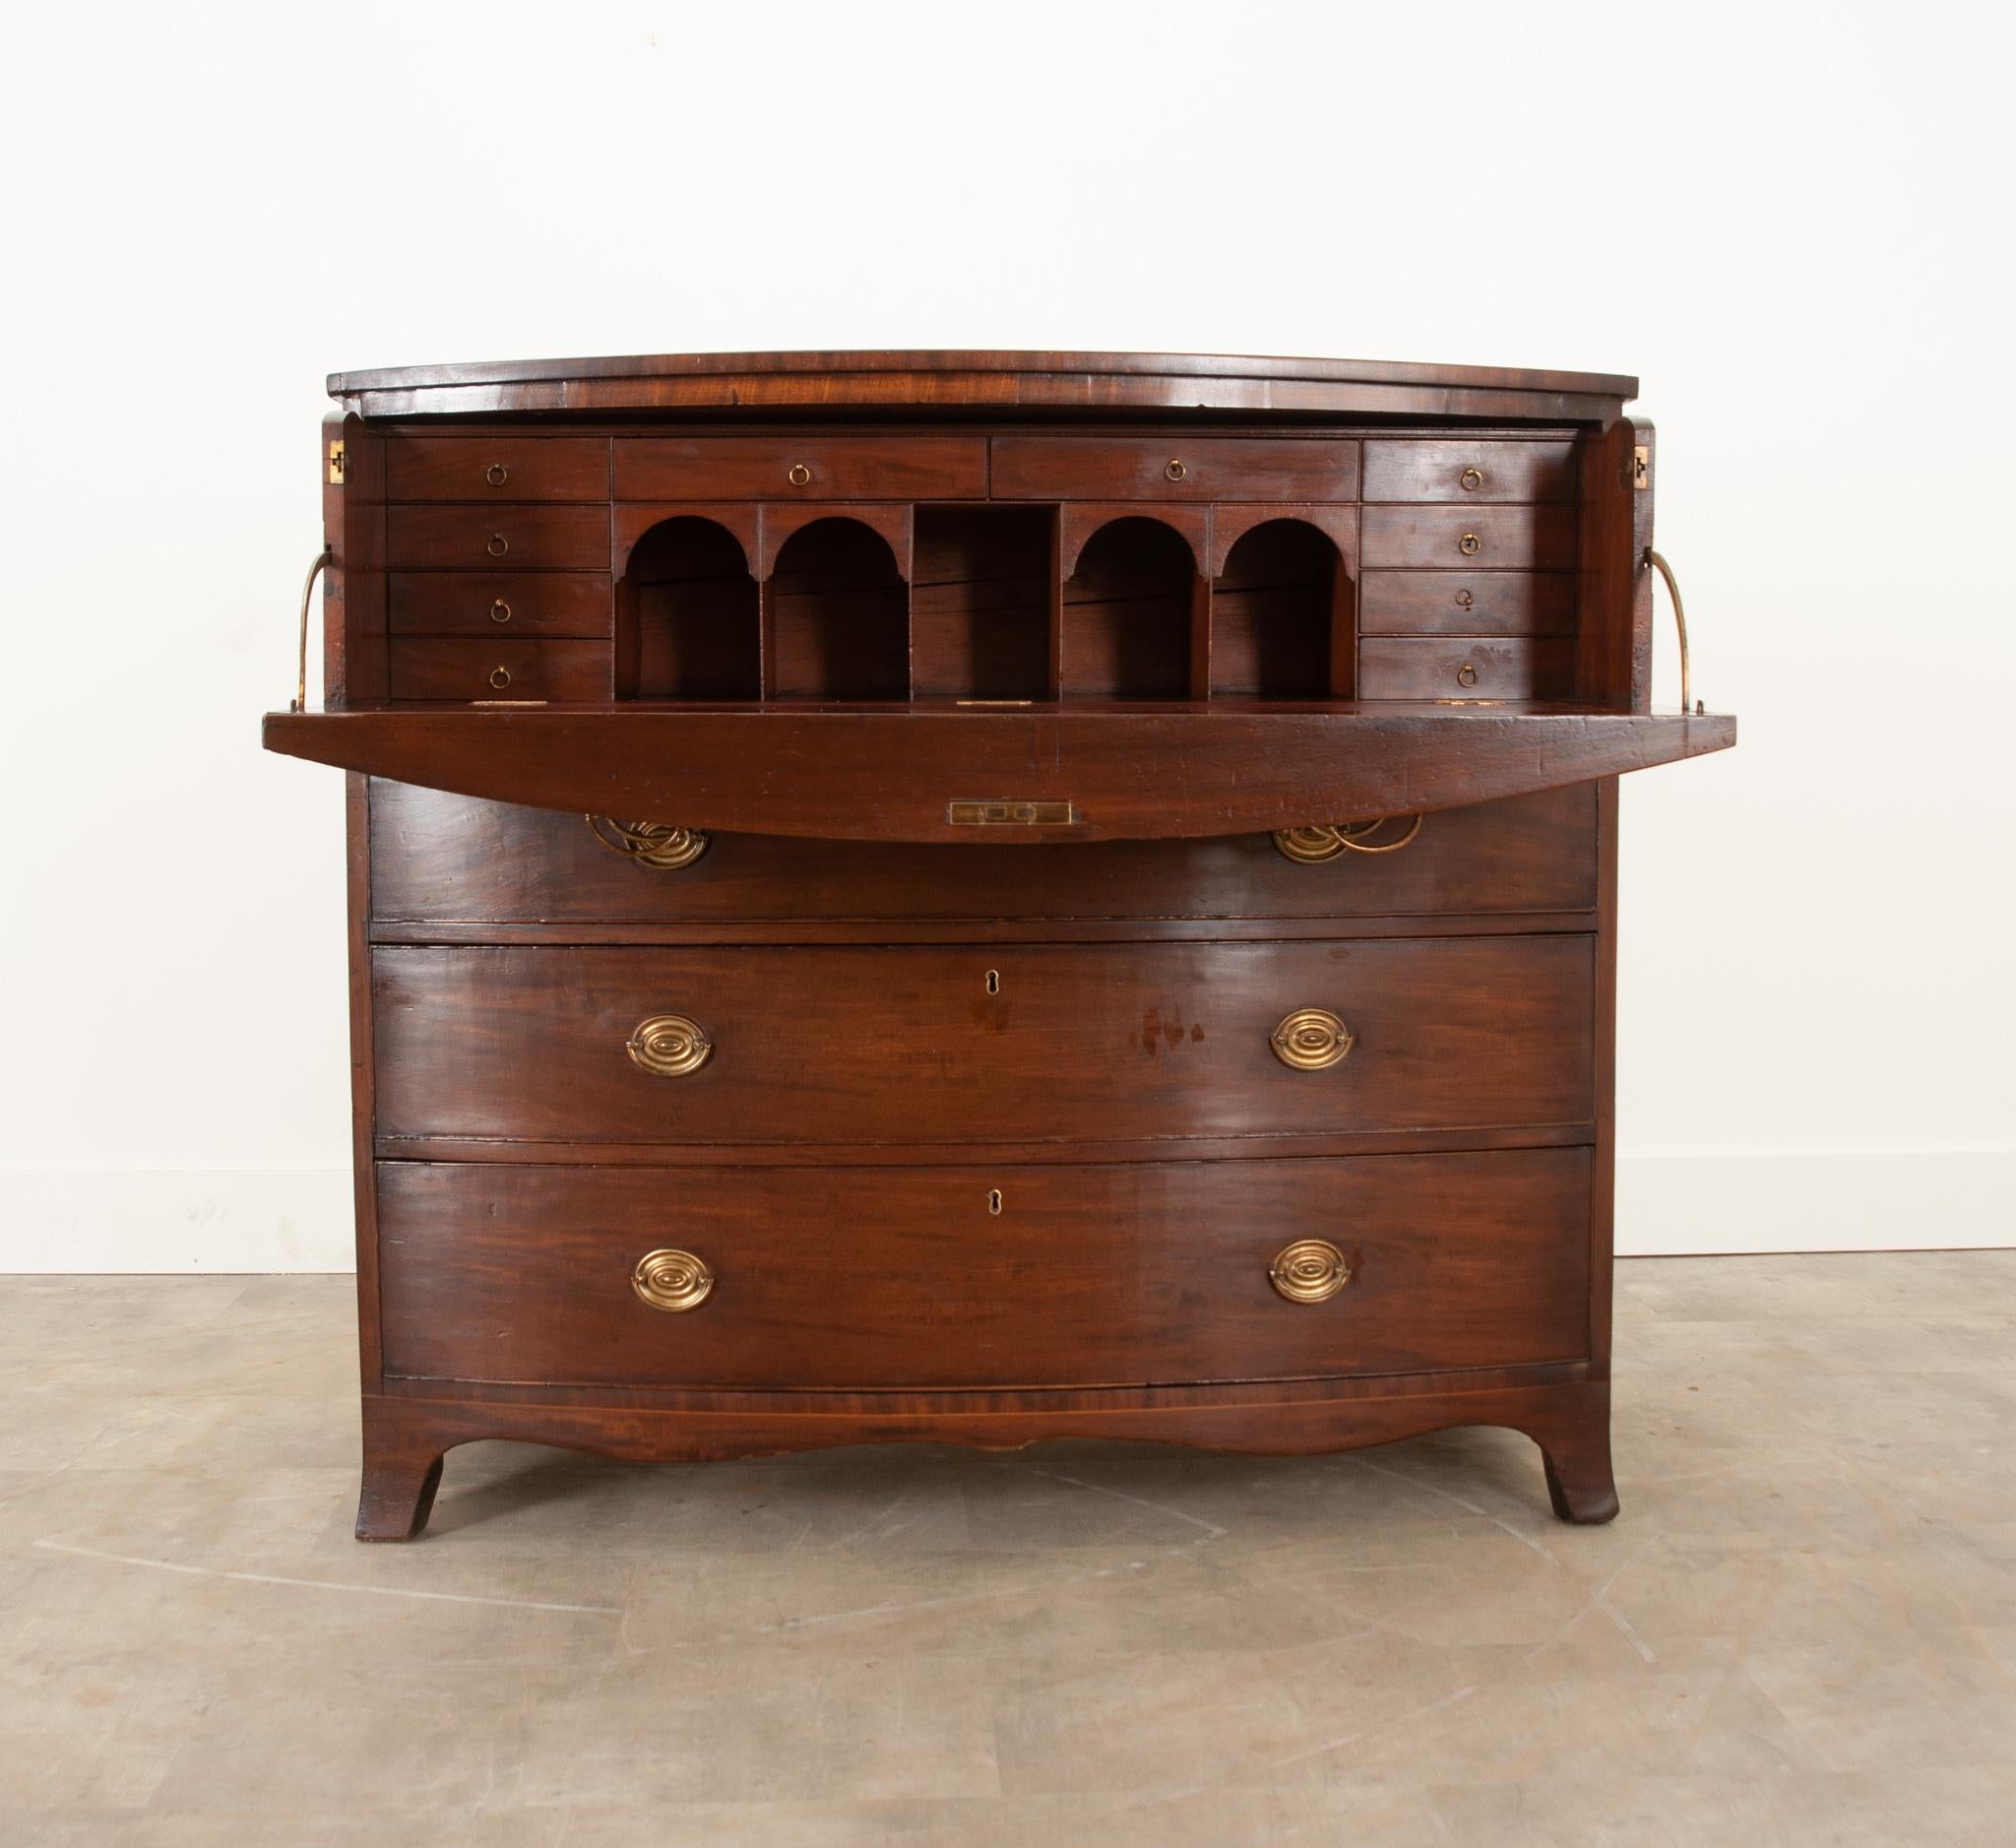 An impressive English Georgian mahogany chest that stands out from the rest. Well taken care of over its lifetime and ready for its next generation of owners. The top two drawers disguise as the drop down desk which conceals 10 drawers and 5 open